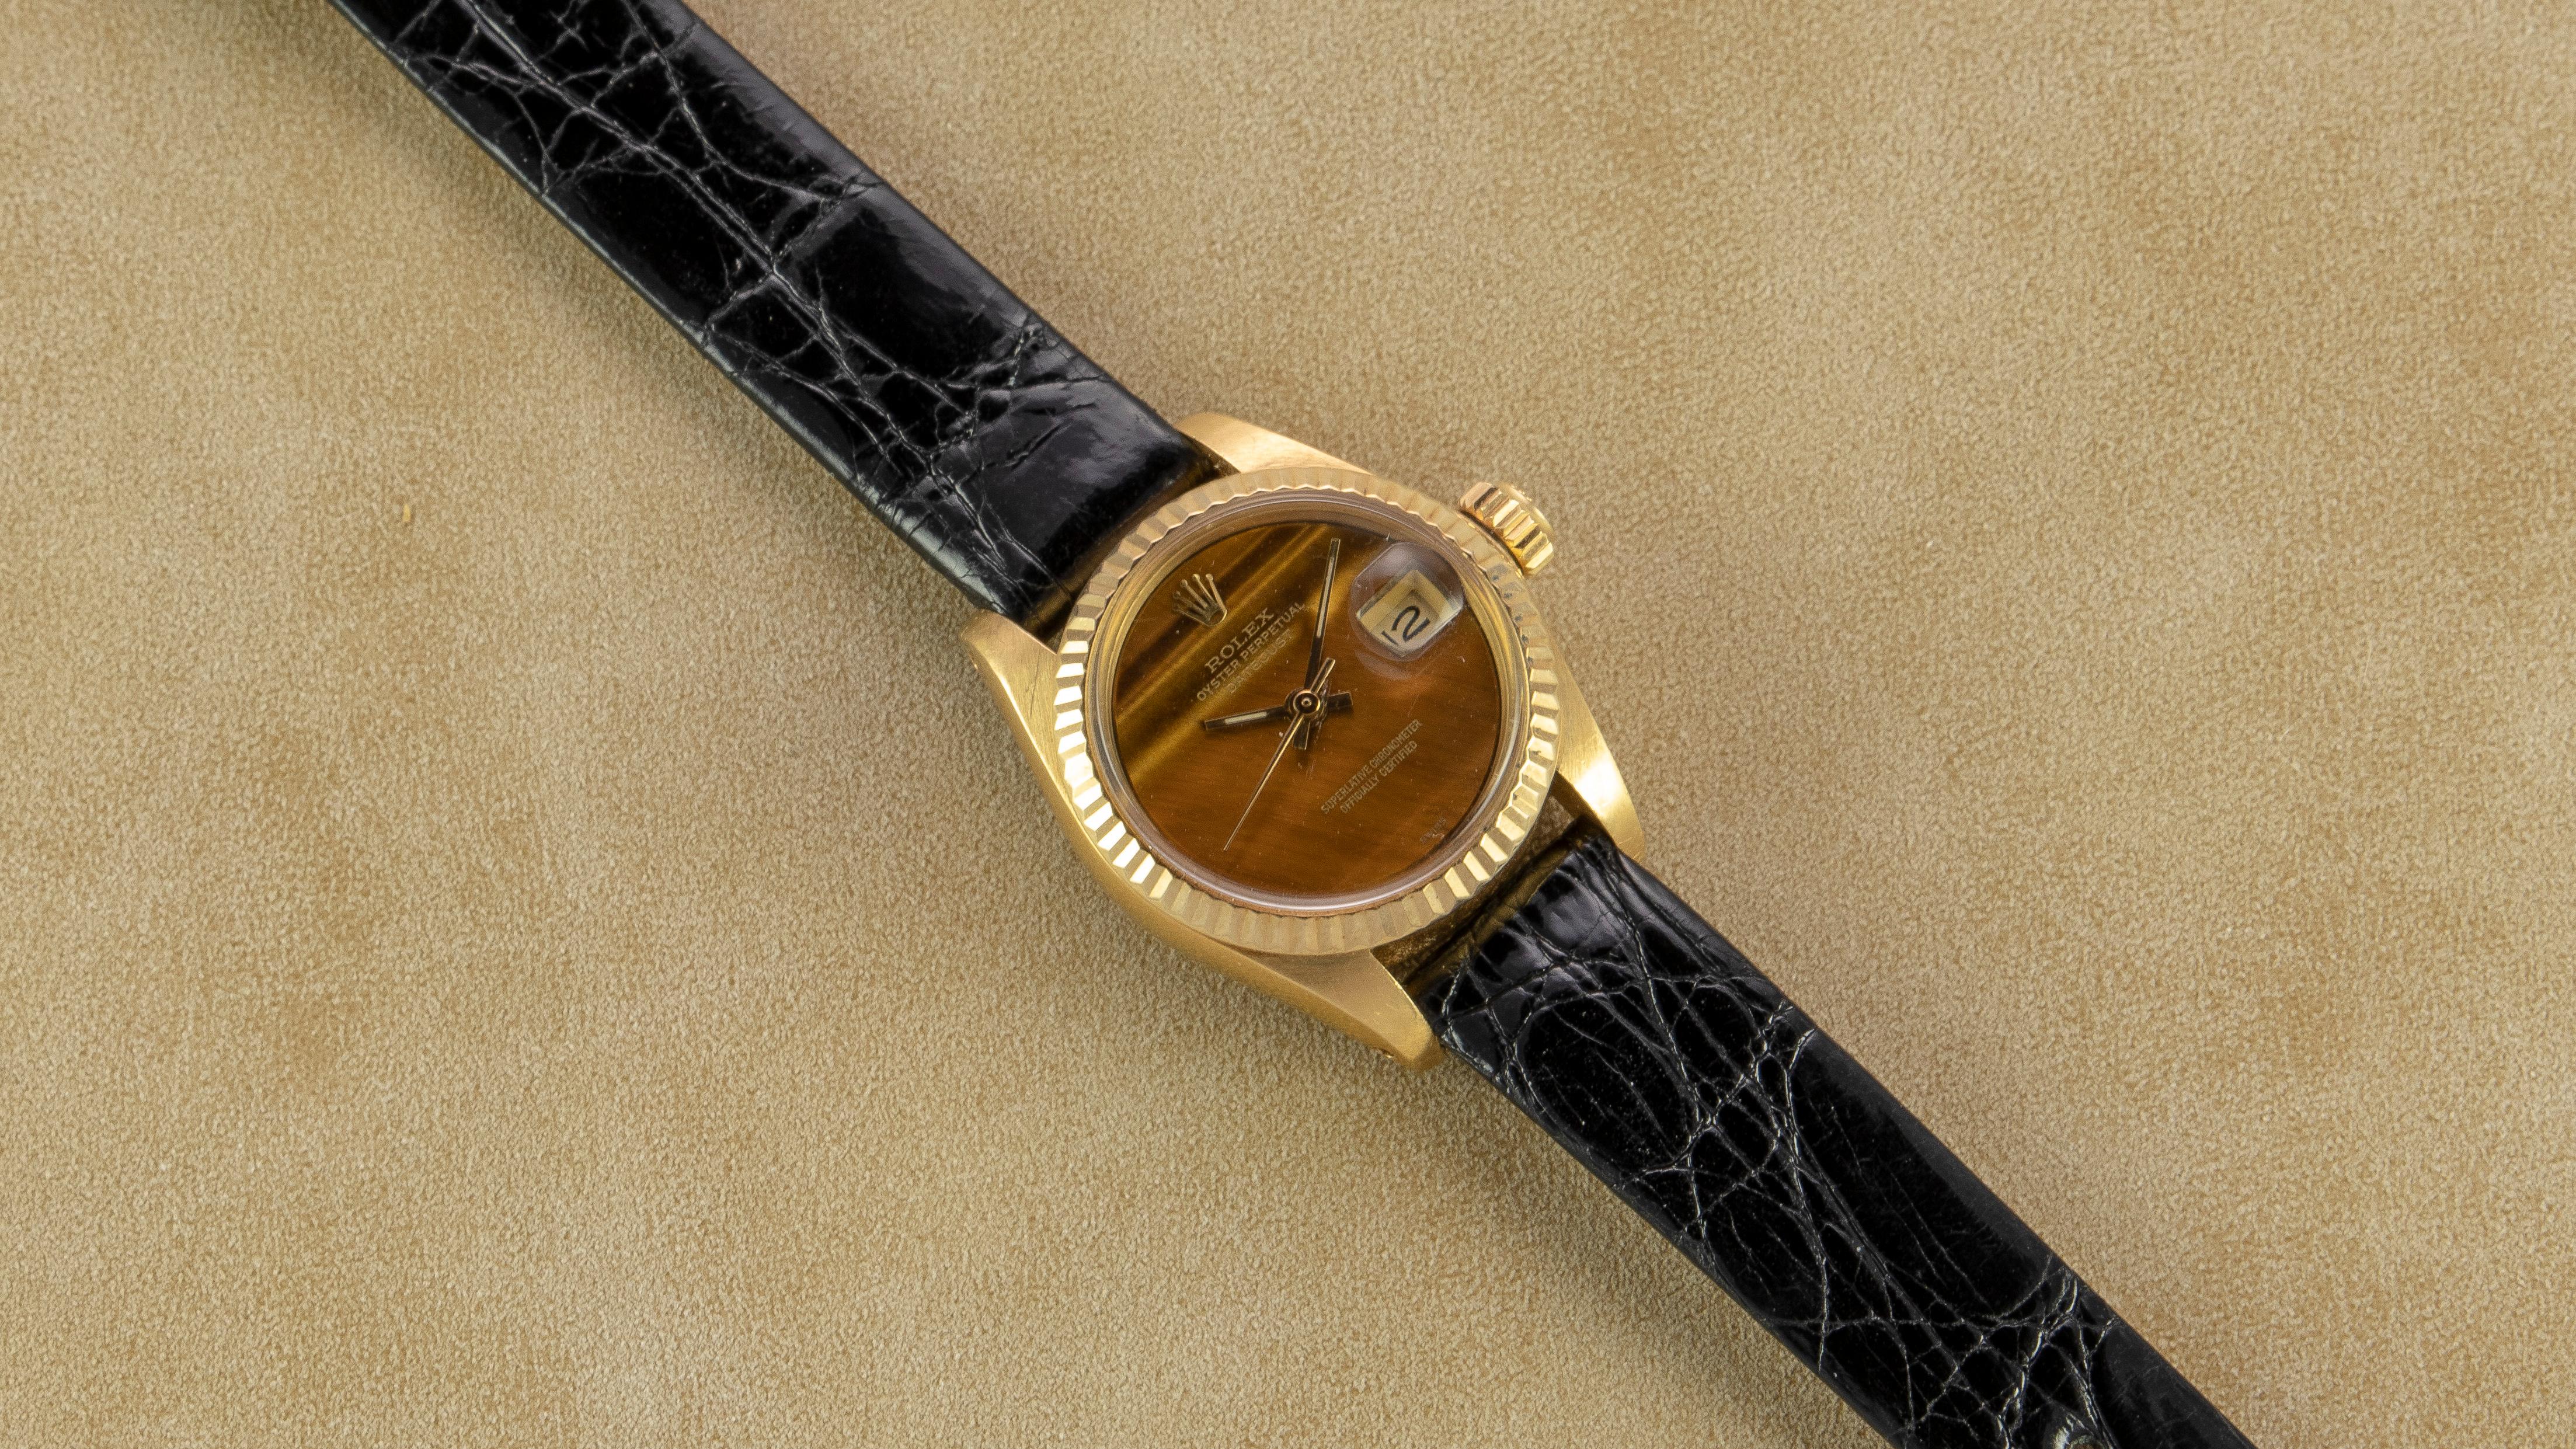 Confident. Bold. Sporty.

Rolex 18K Yellow Gold Ladies Oyster Perpetual Datejust with Factory Tiger's Eye Dial

The Rolex Ladies Oyster Perpetual Datejust is timeless. It exudes femininity, confidence, and a playful side. The distinct look of this